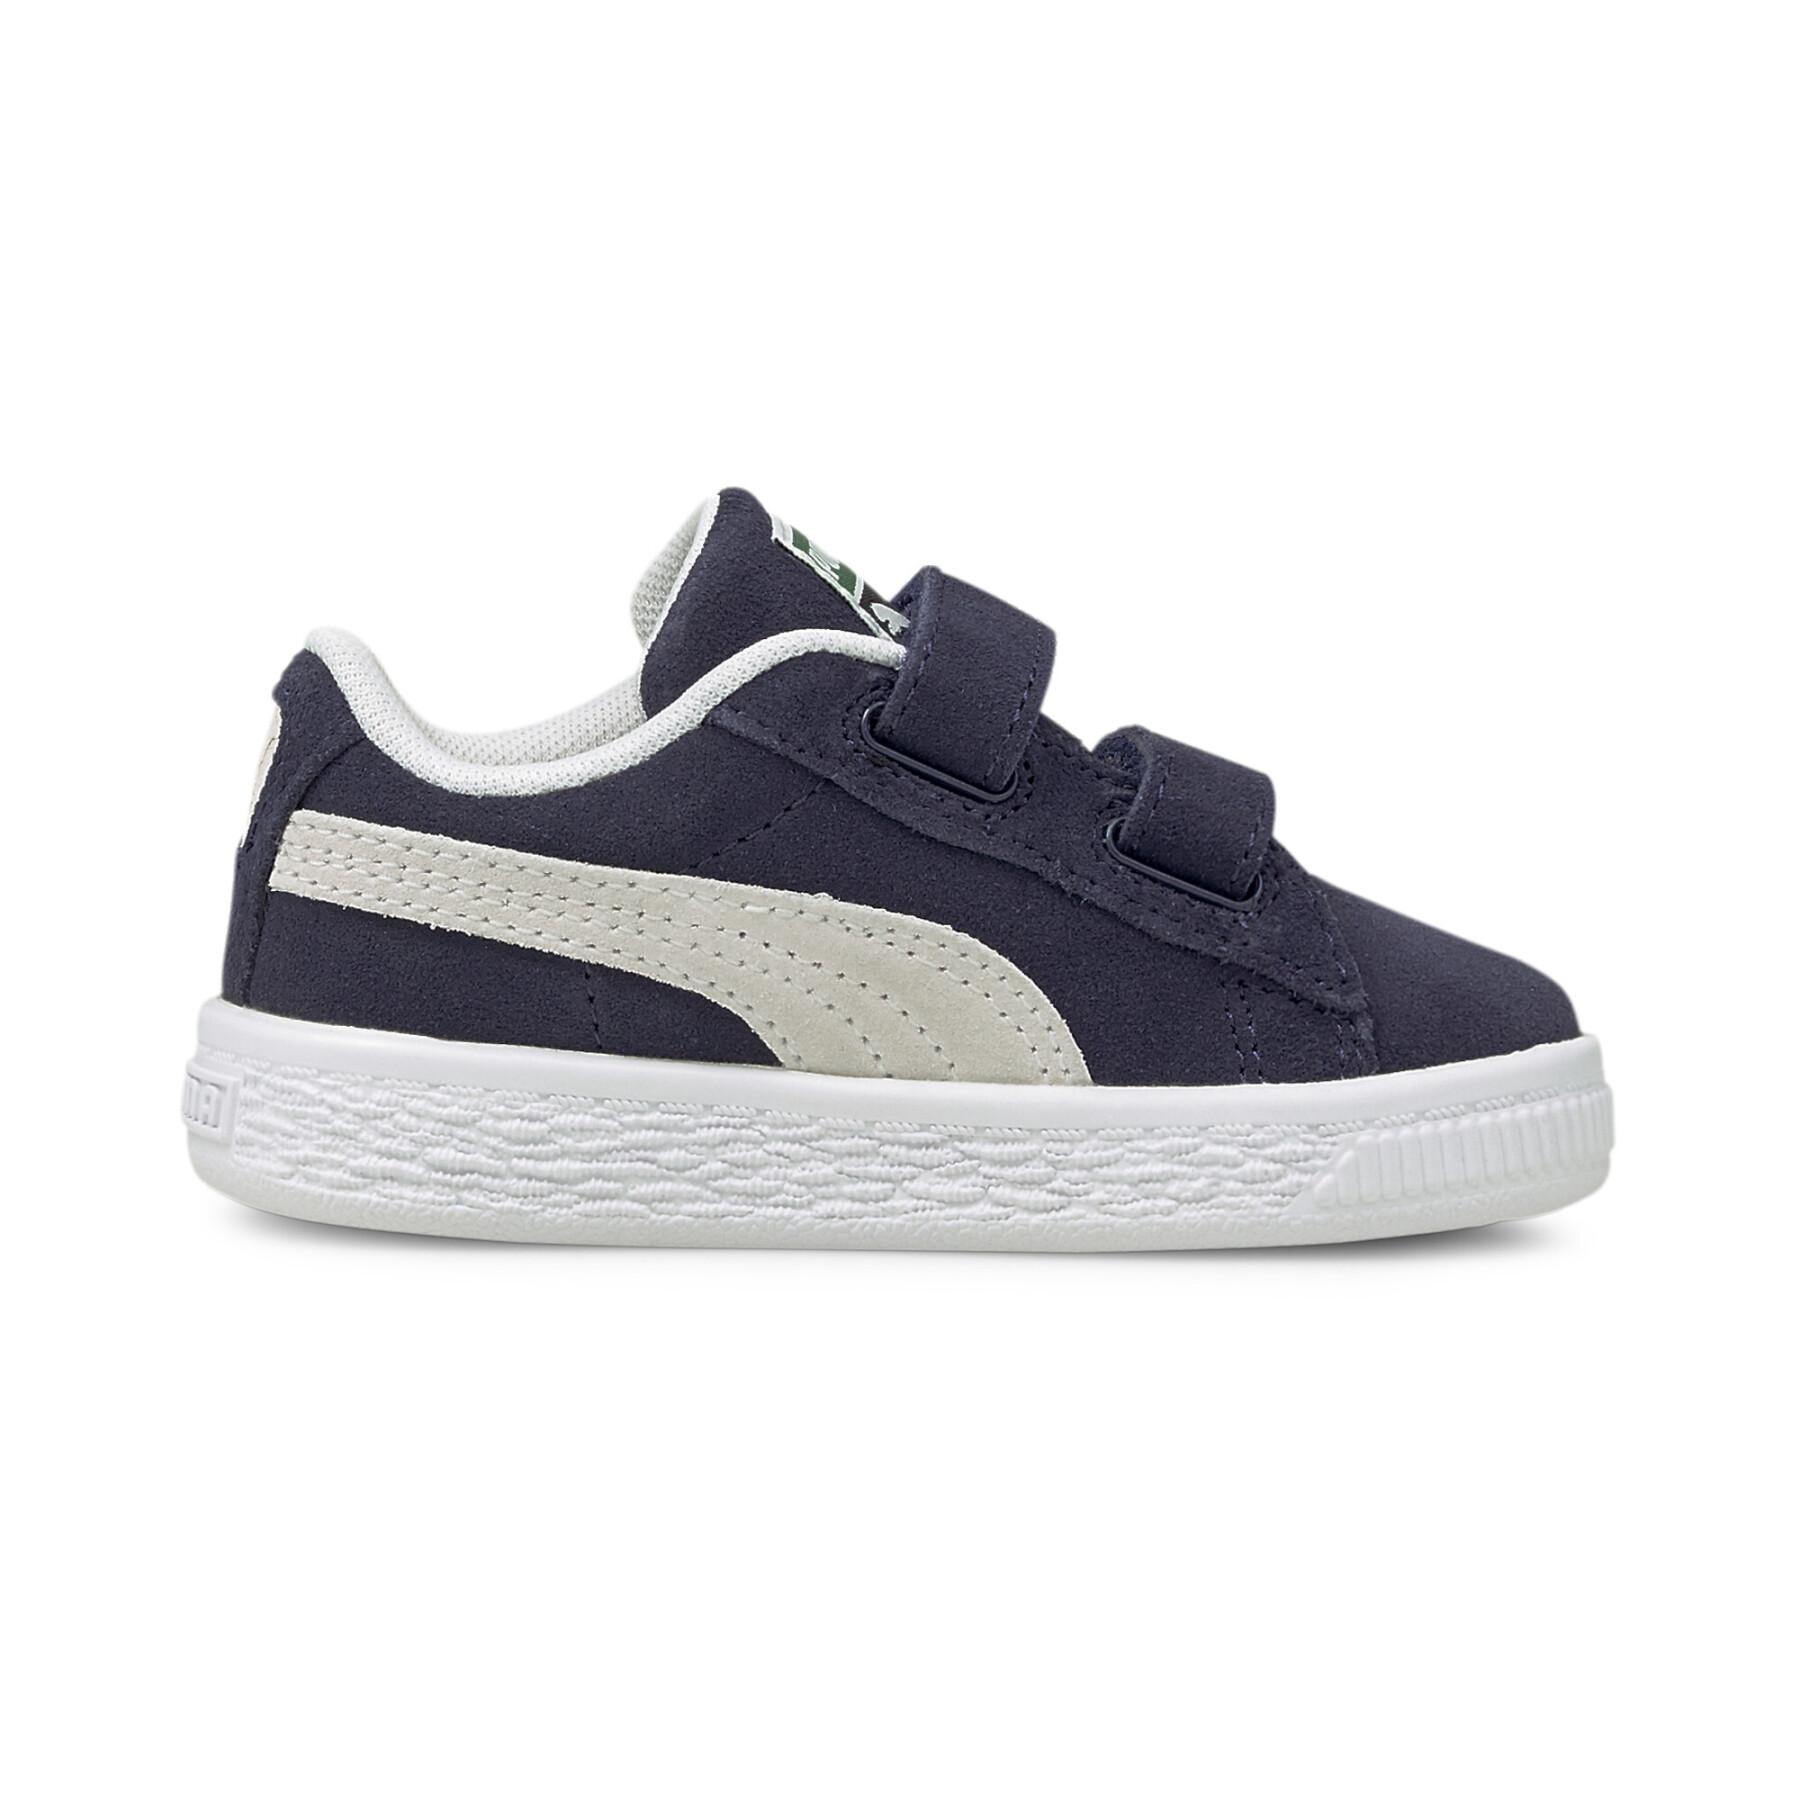 Children's shoes suede classic xxi v inf